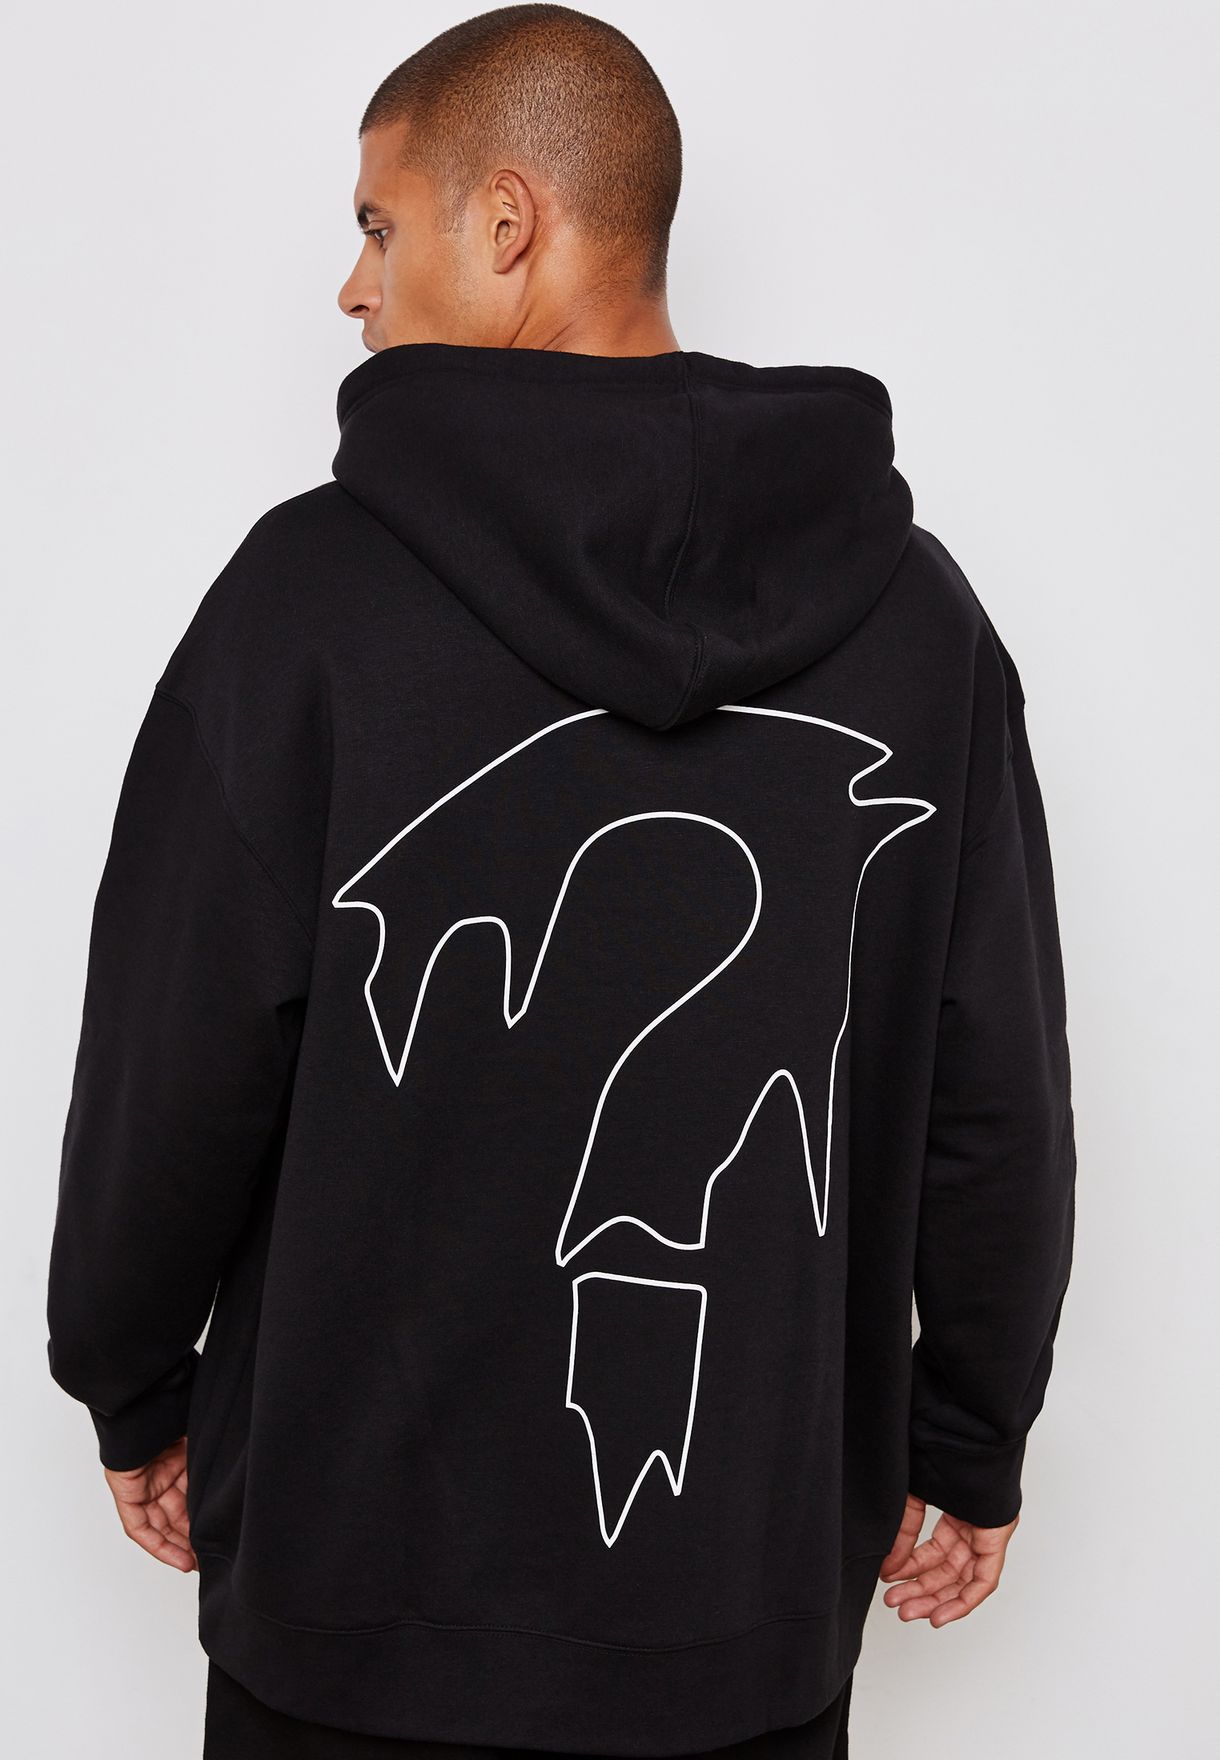 Buy Cheap Monday black Outline On Back Hoodie for Men in MENA, Worldwide